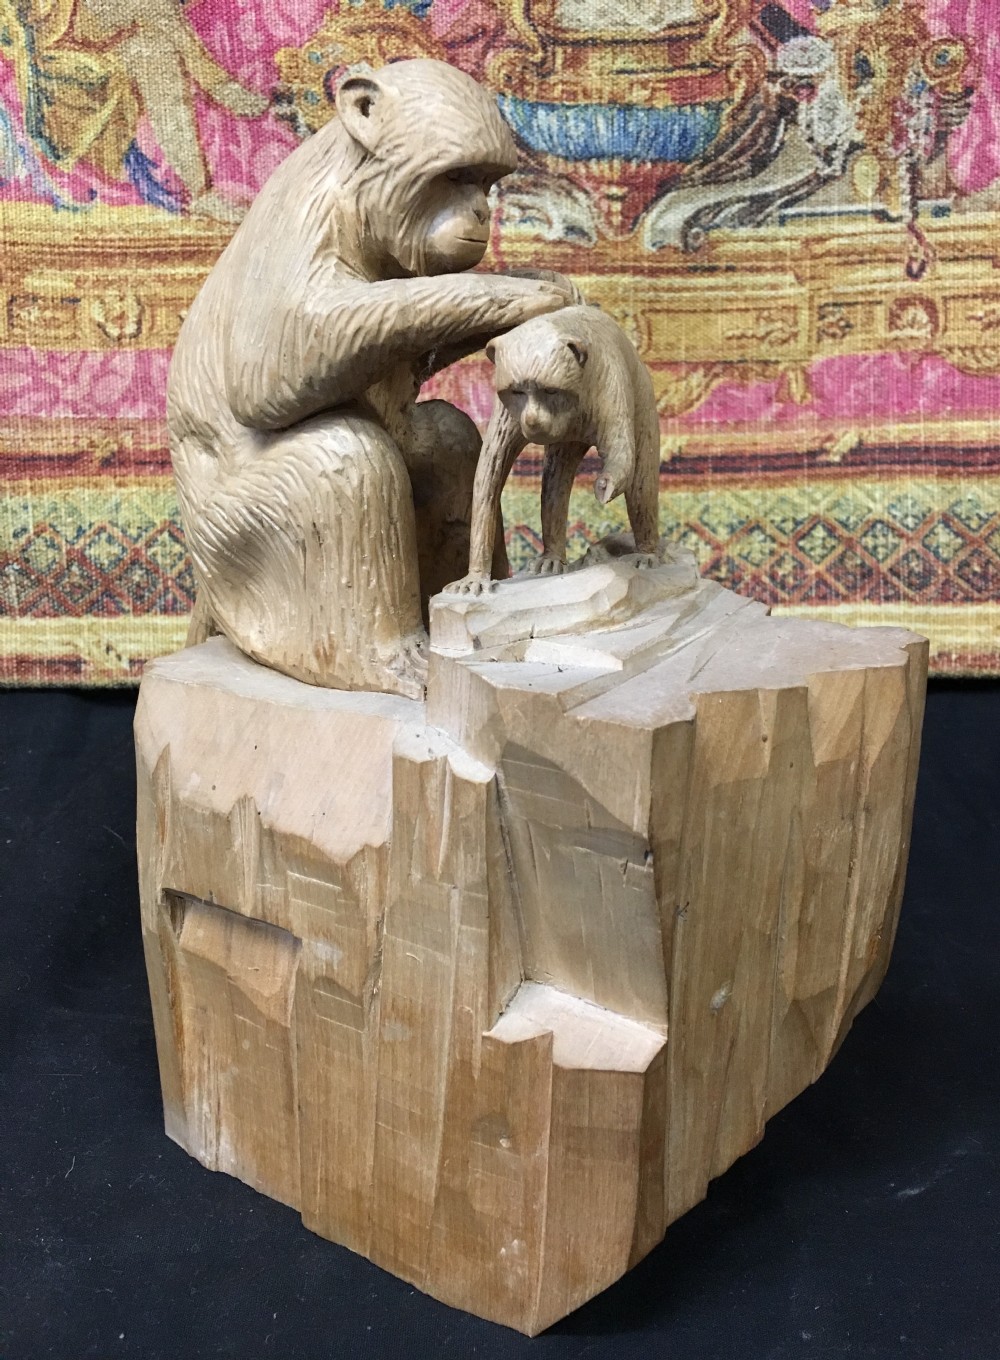 c20th limewood carving of a monkey tending its baby